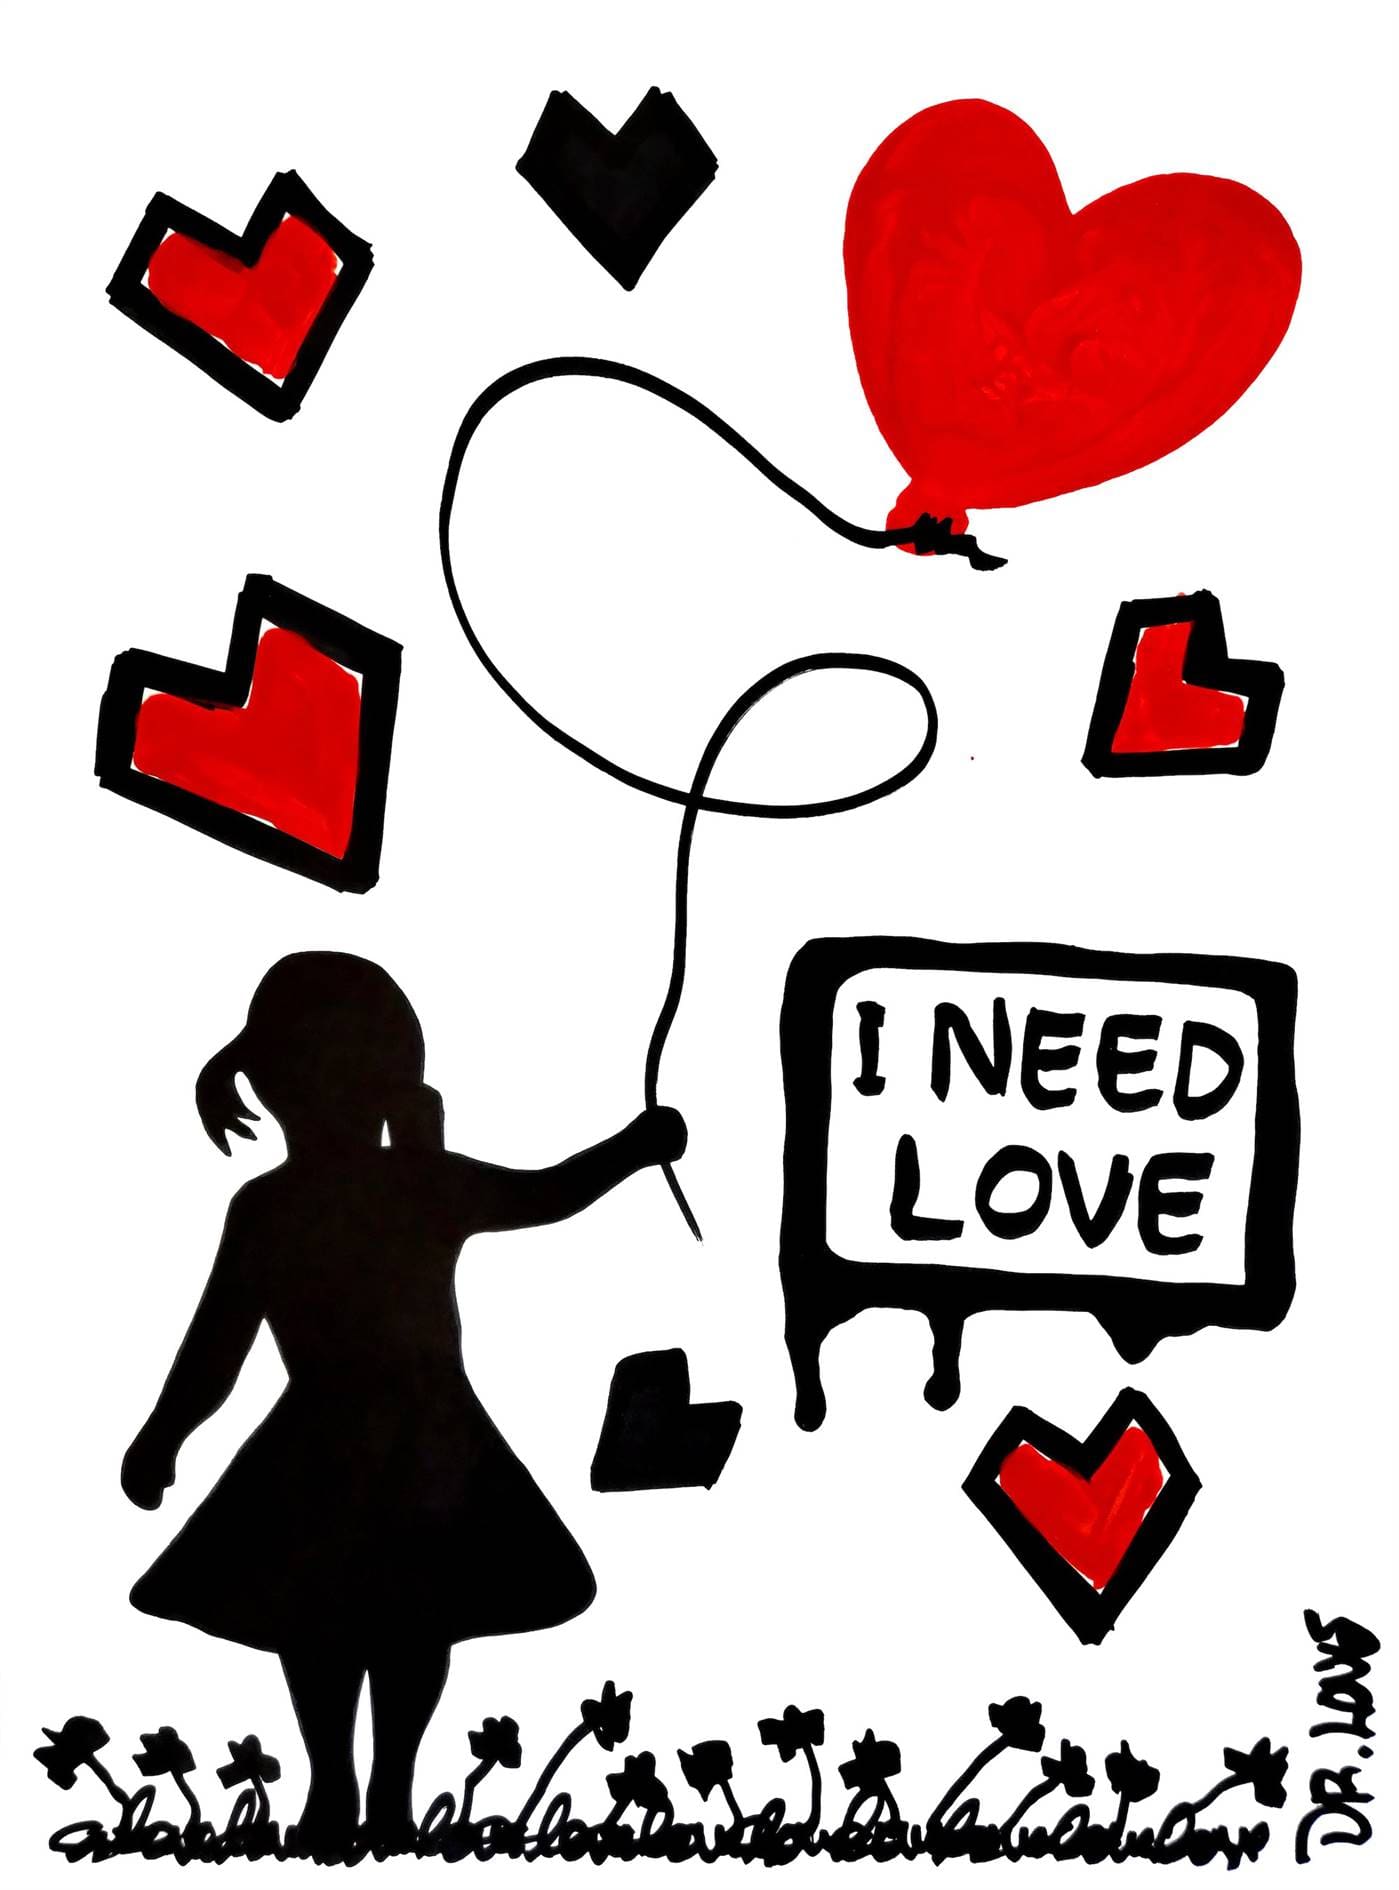 Dr. Love - I need love canvas